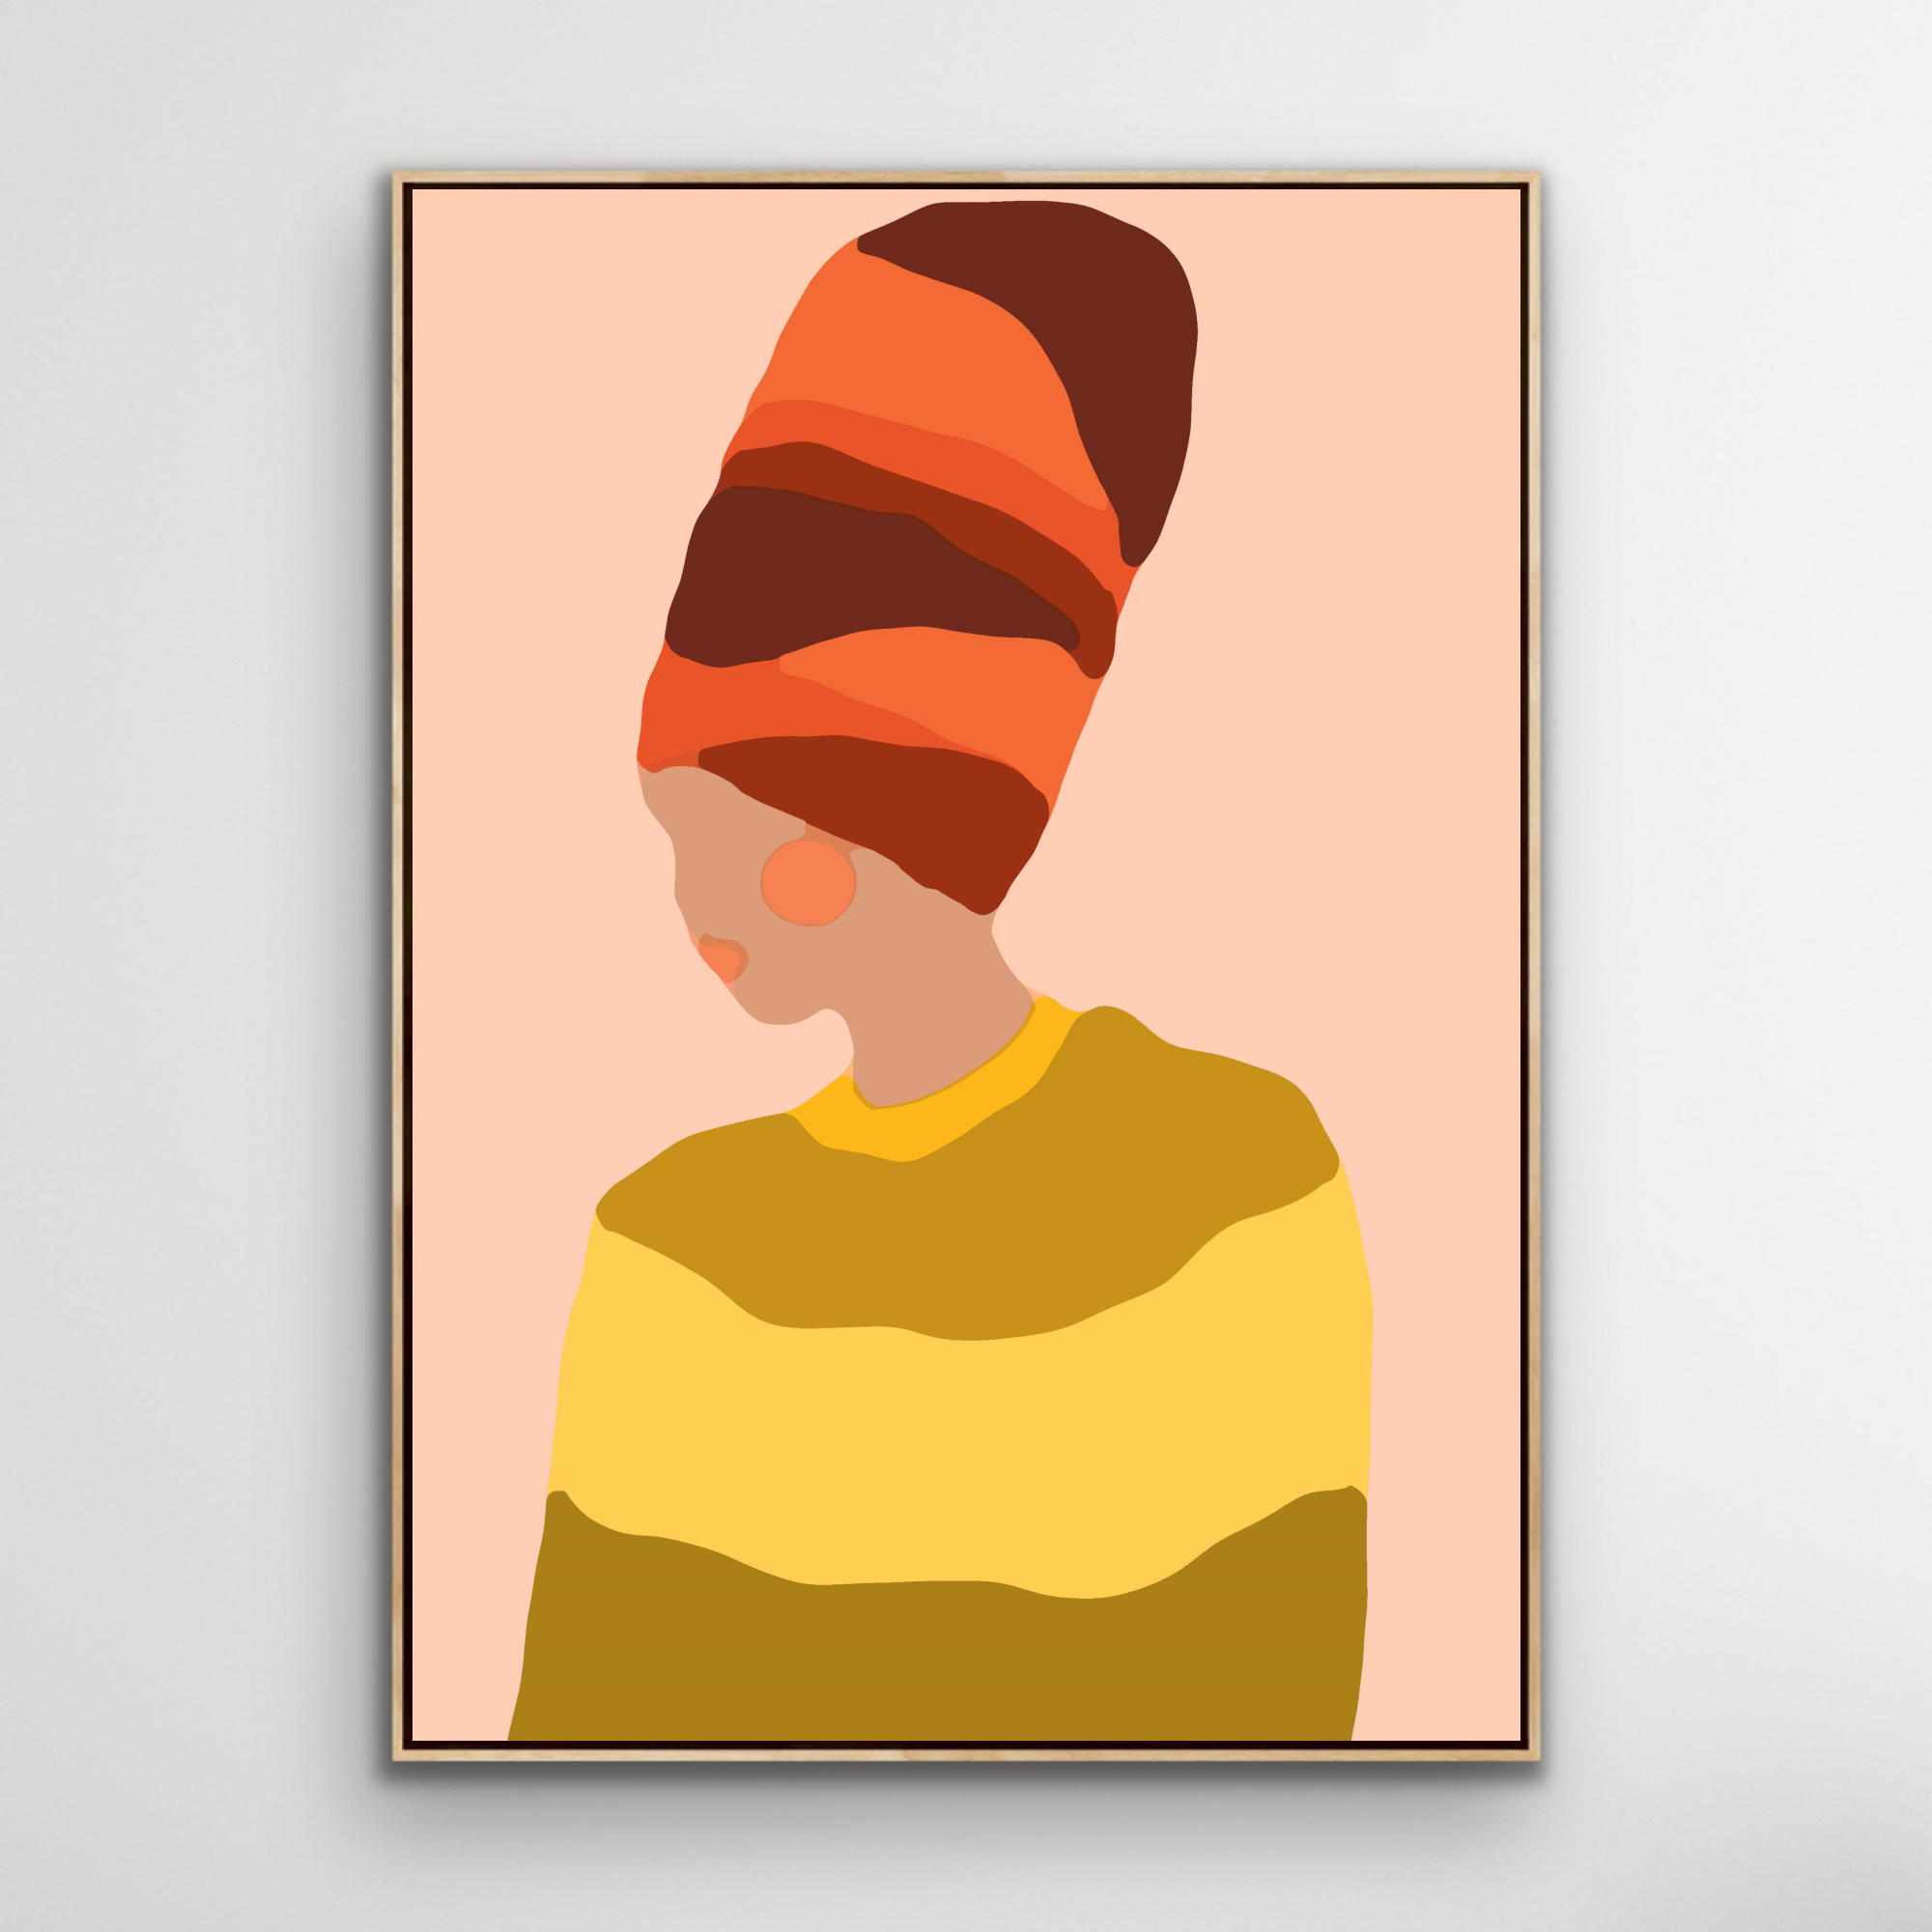 Poster: "Woman In Yellow"